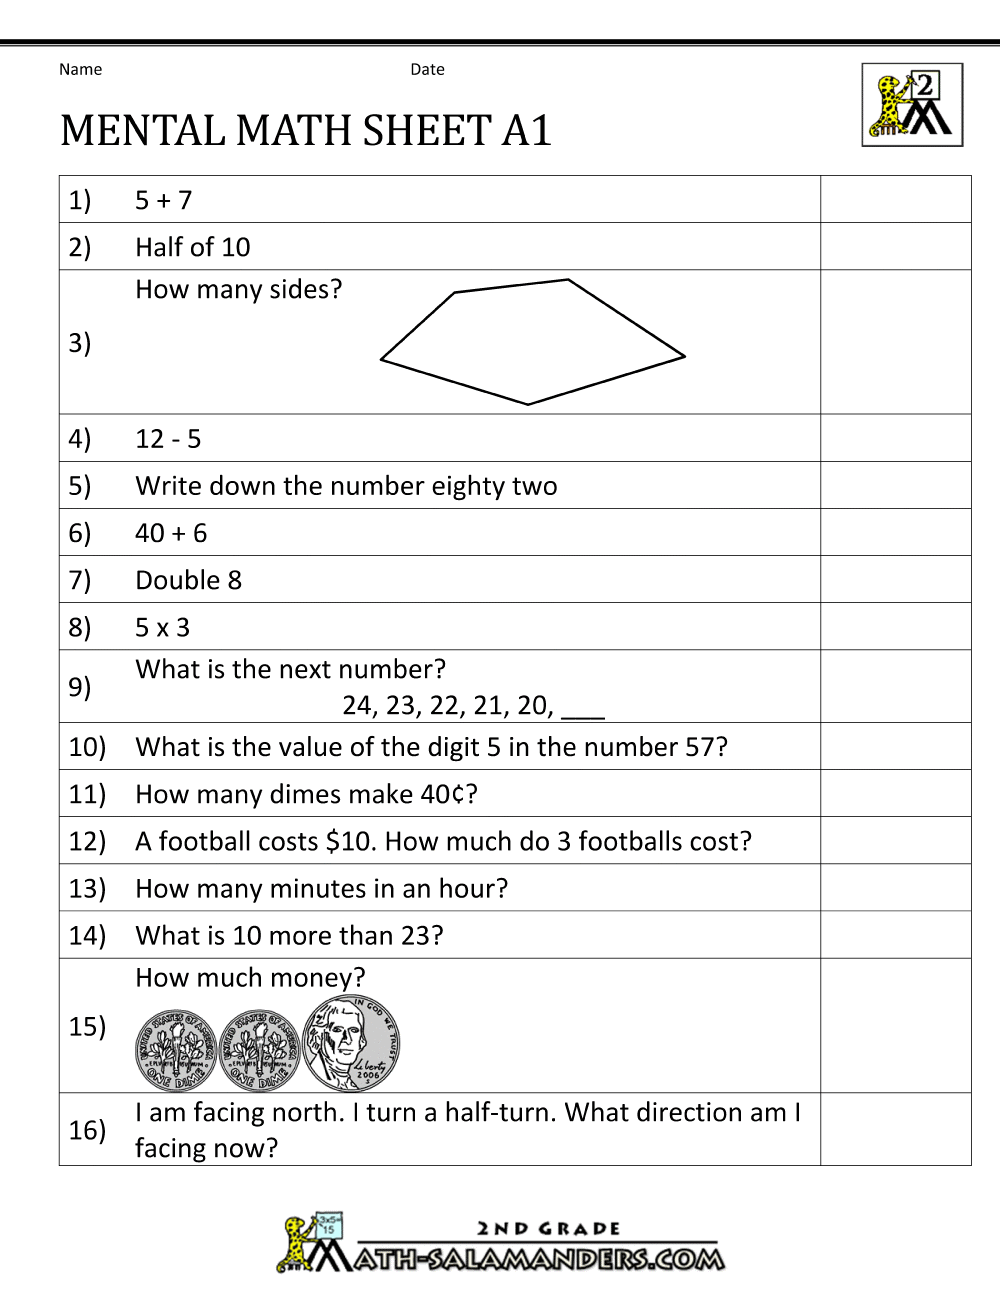 37 MATHS WORKSHEETS FOR GRADE 7 CBSE WITH ANSWERS